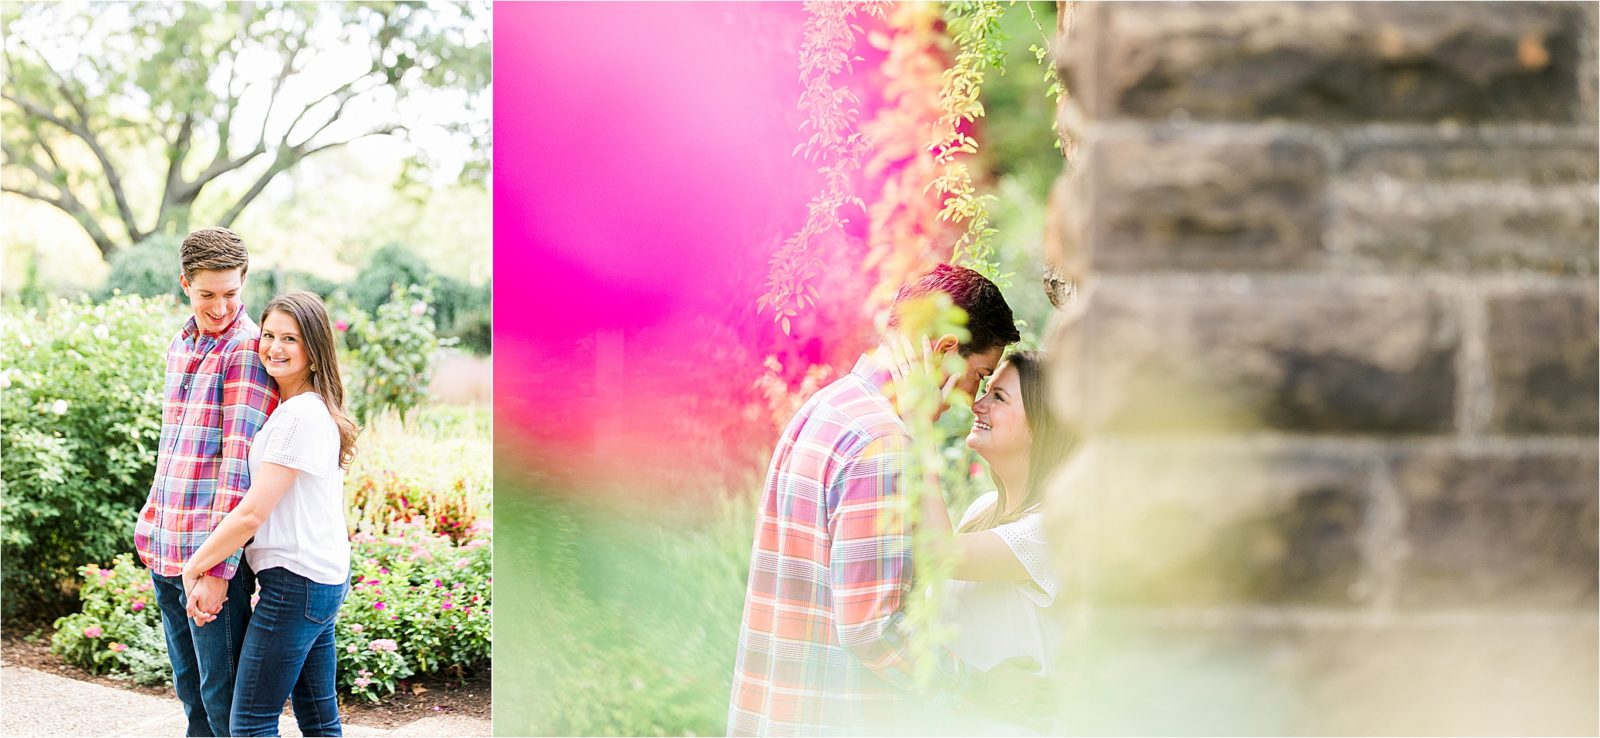 Colorful Fall Engagement Session at The Fort Worth Botanic Gardens in DFW by Engagement Photographer Jillian Hogan 